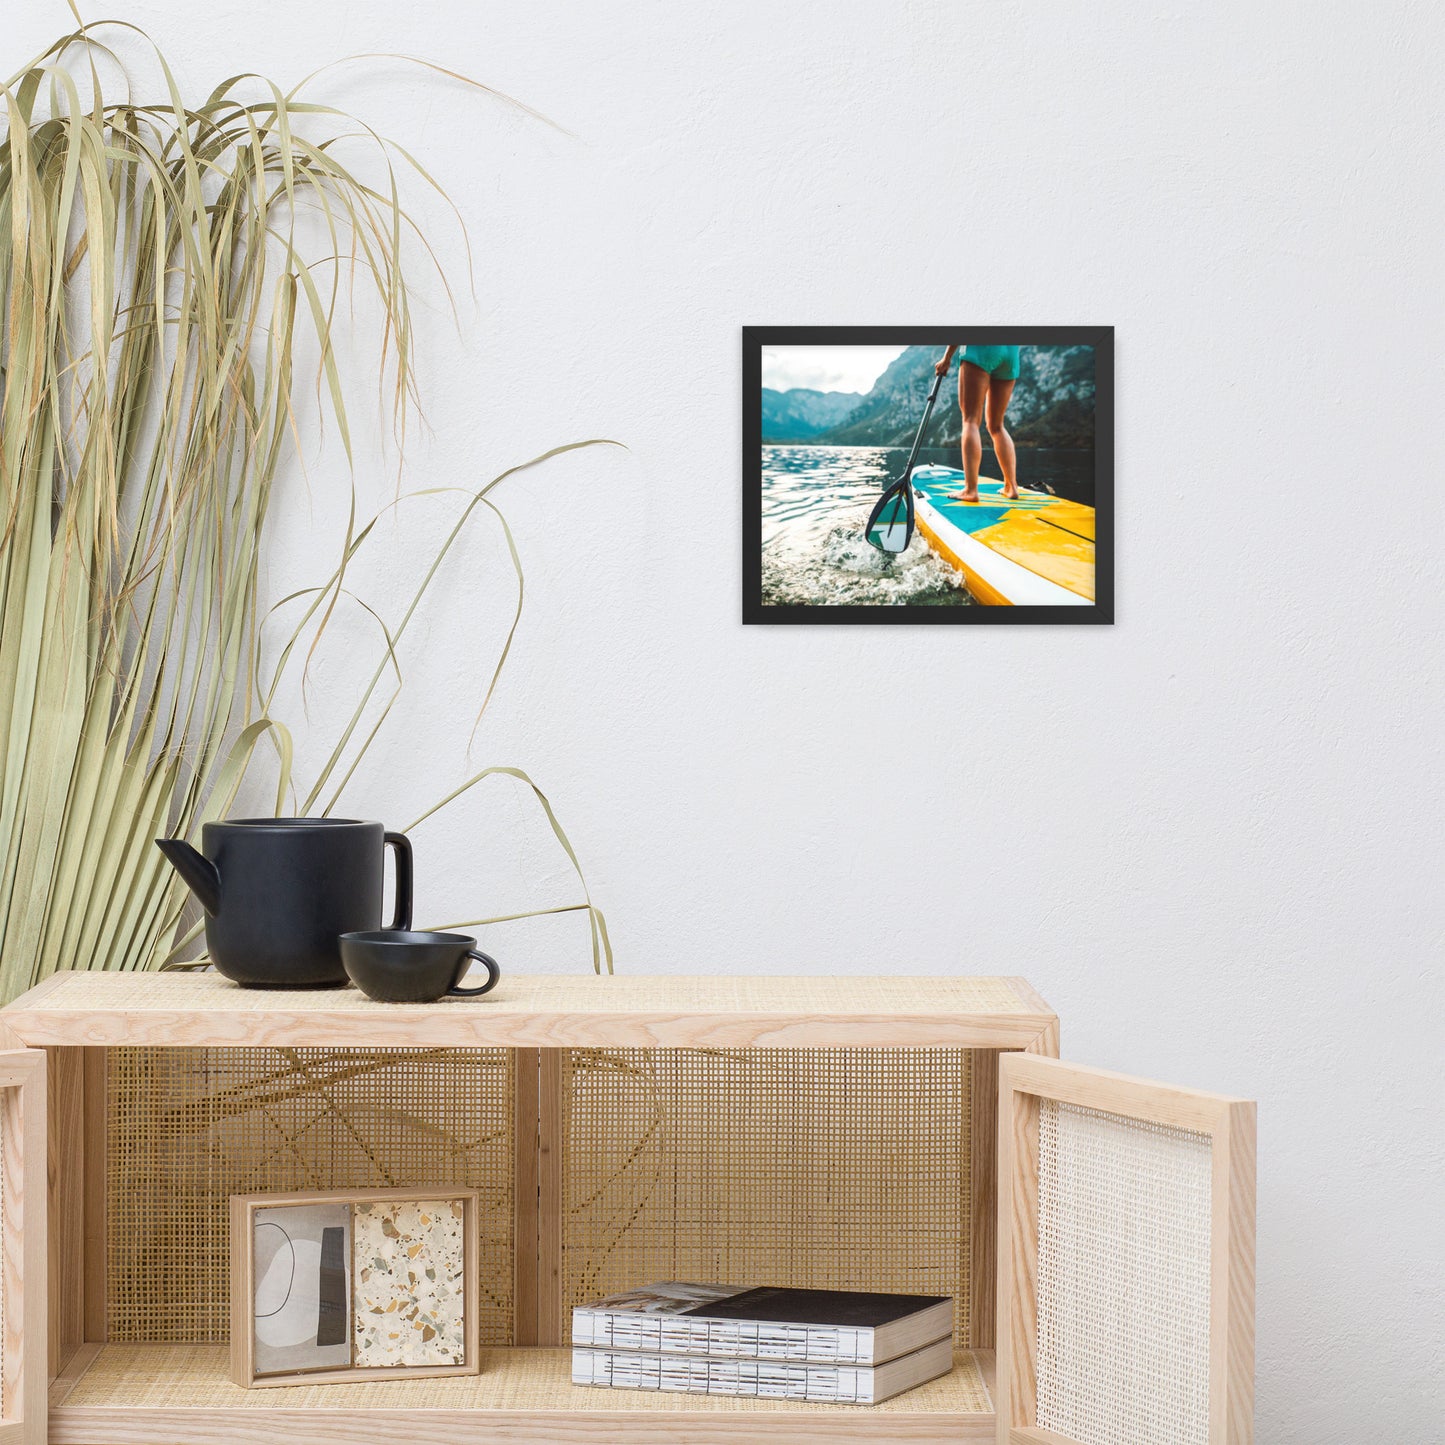 A Moment of Solitude Lifestyle Photograph Framed Wall Art Print